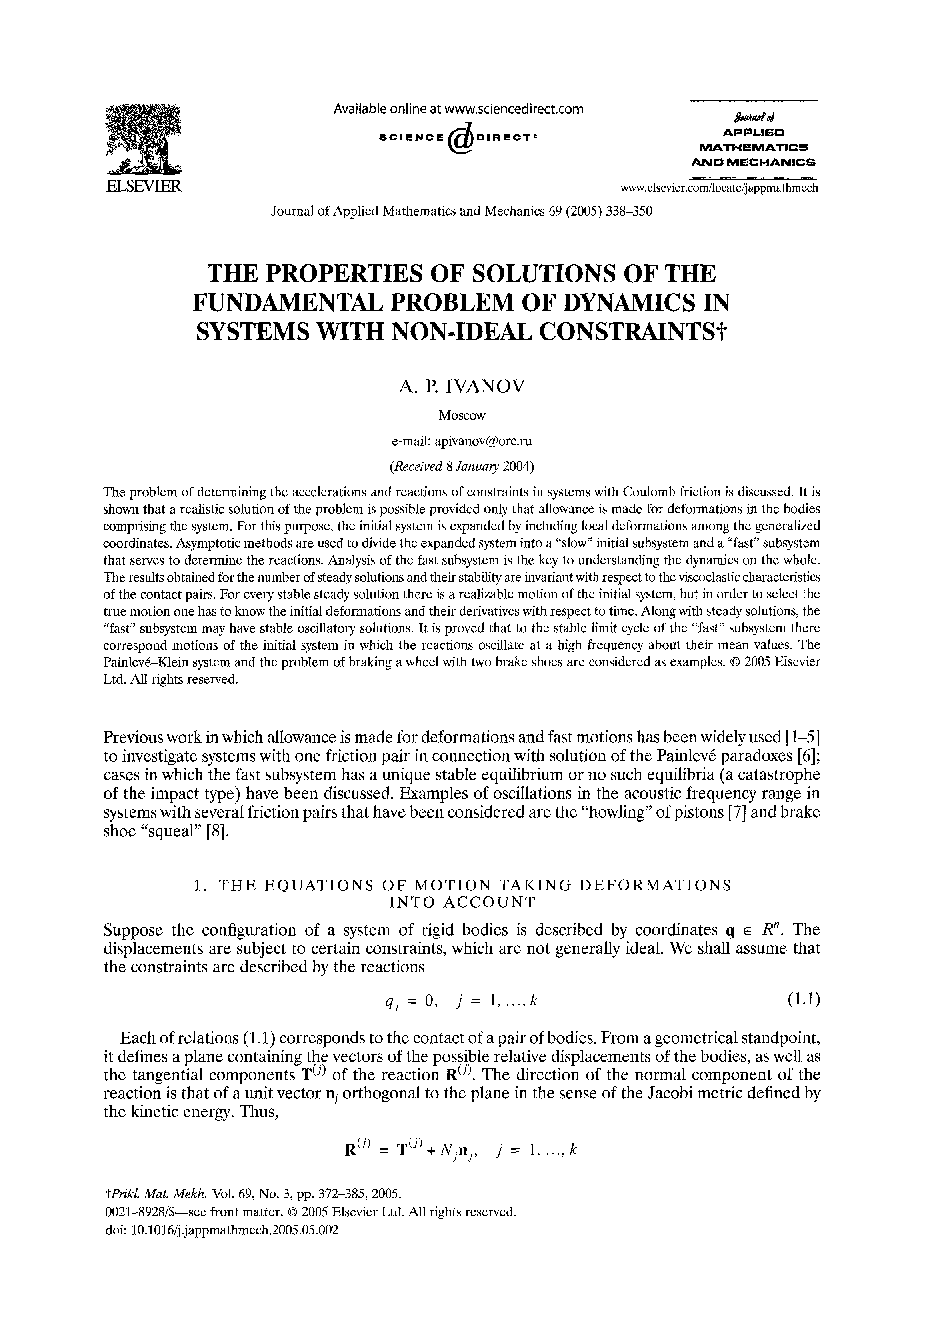 The properties of solutions of the fundamental problem of dynamics in systems with non-ideal constraints